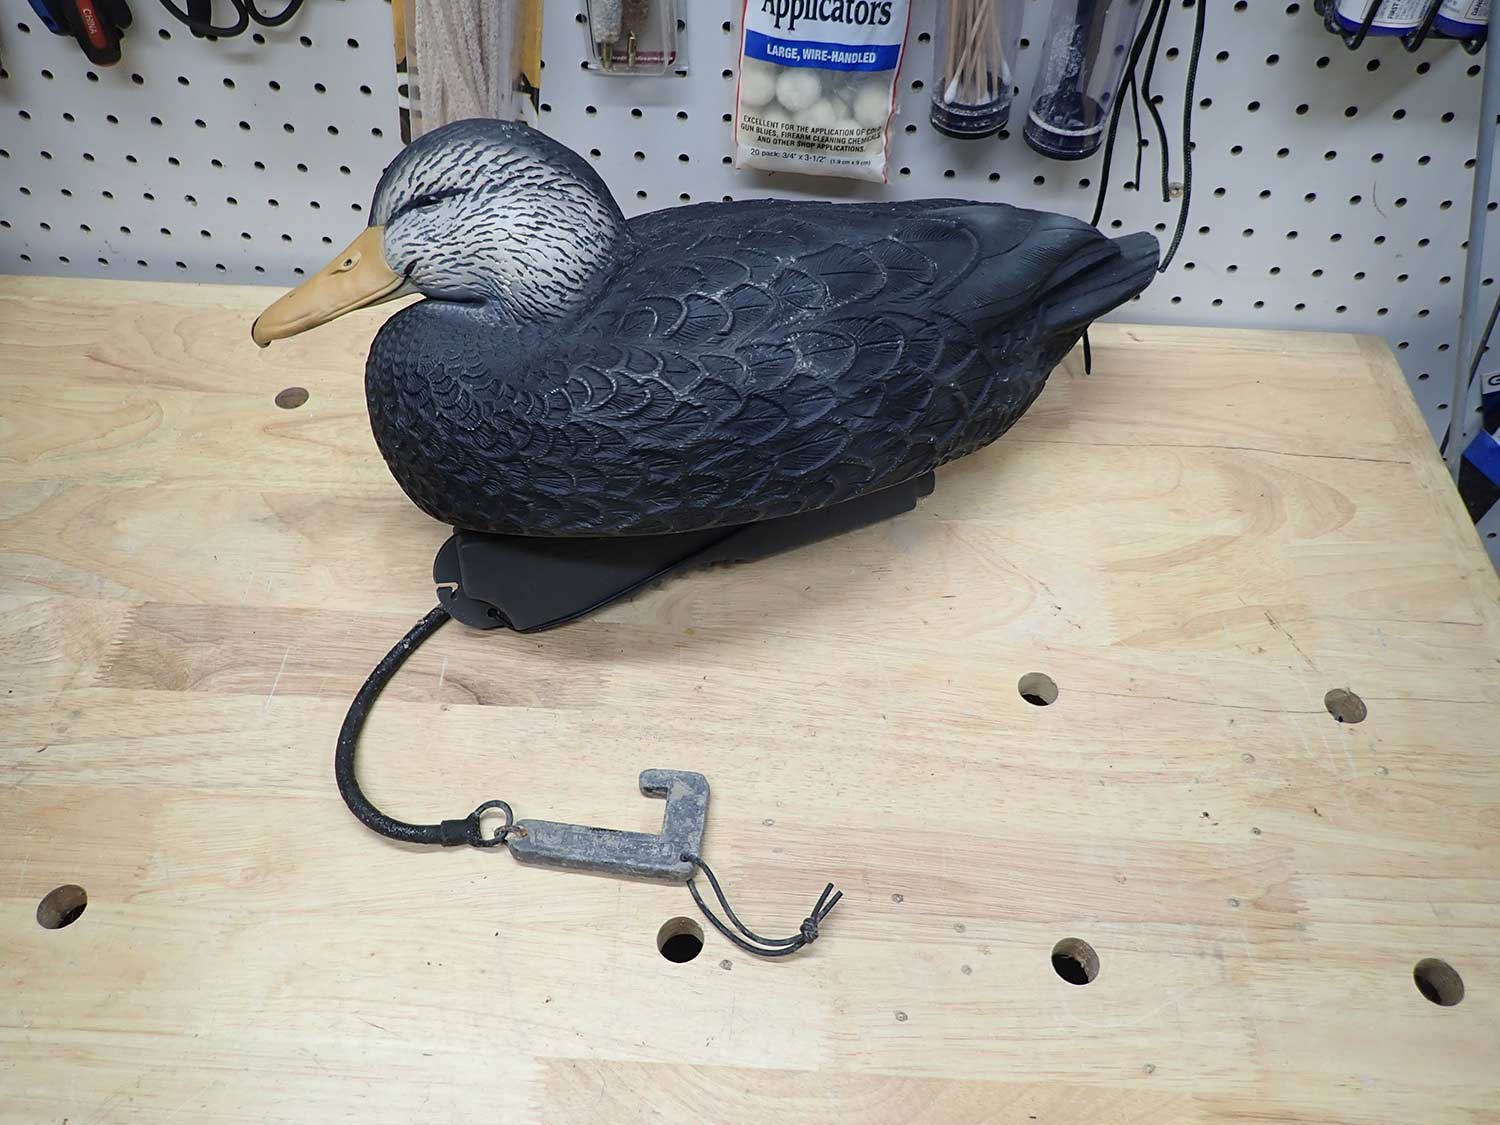 A decoy with a repaired stretch cord.